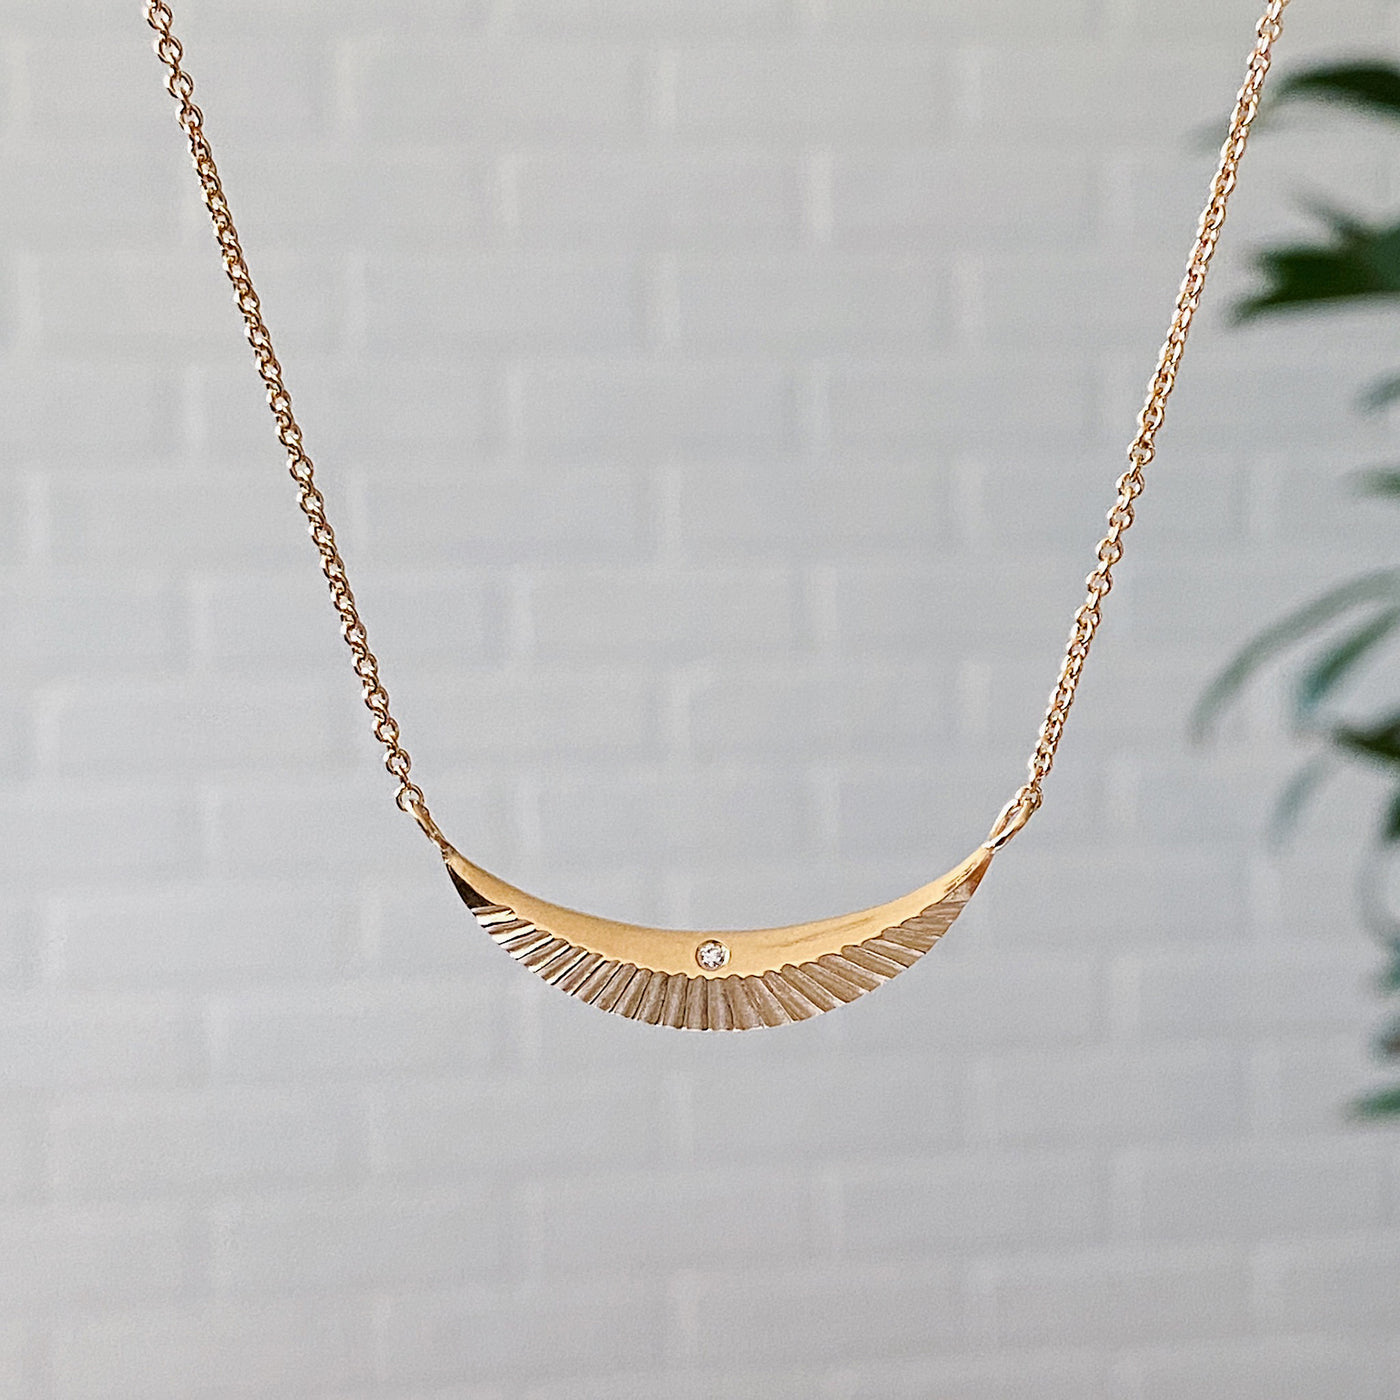 Crescent necklace with carved rays and a single diamond in vermeil 